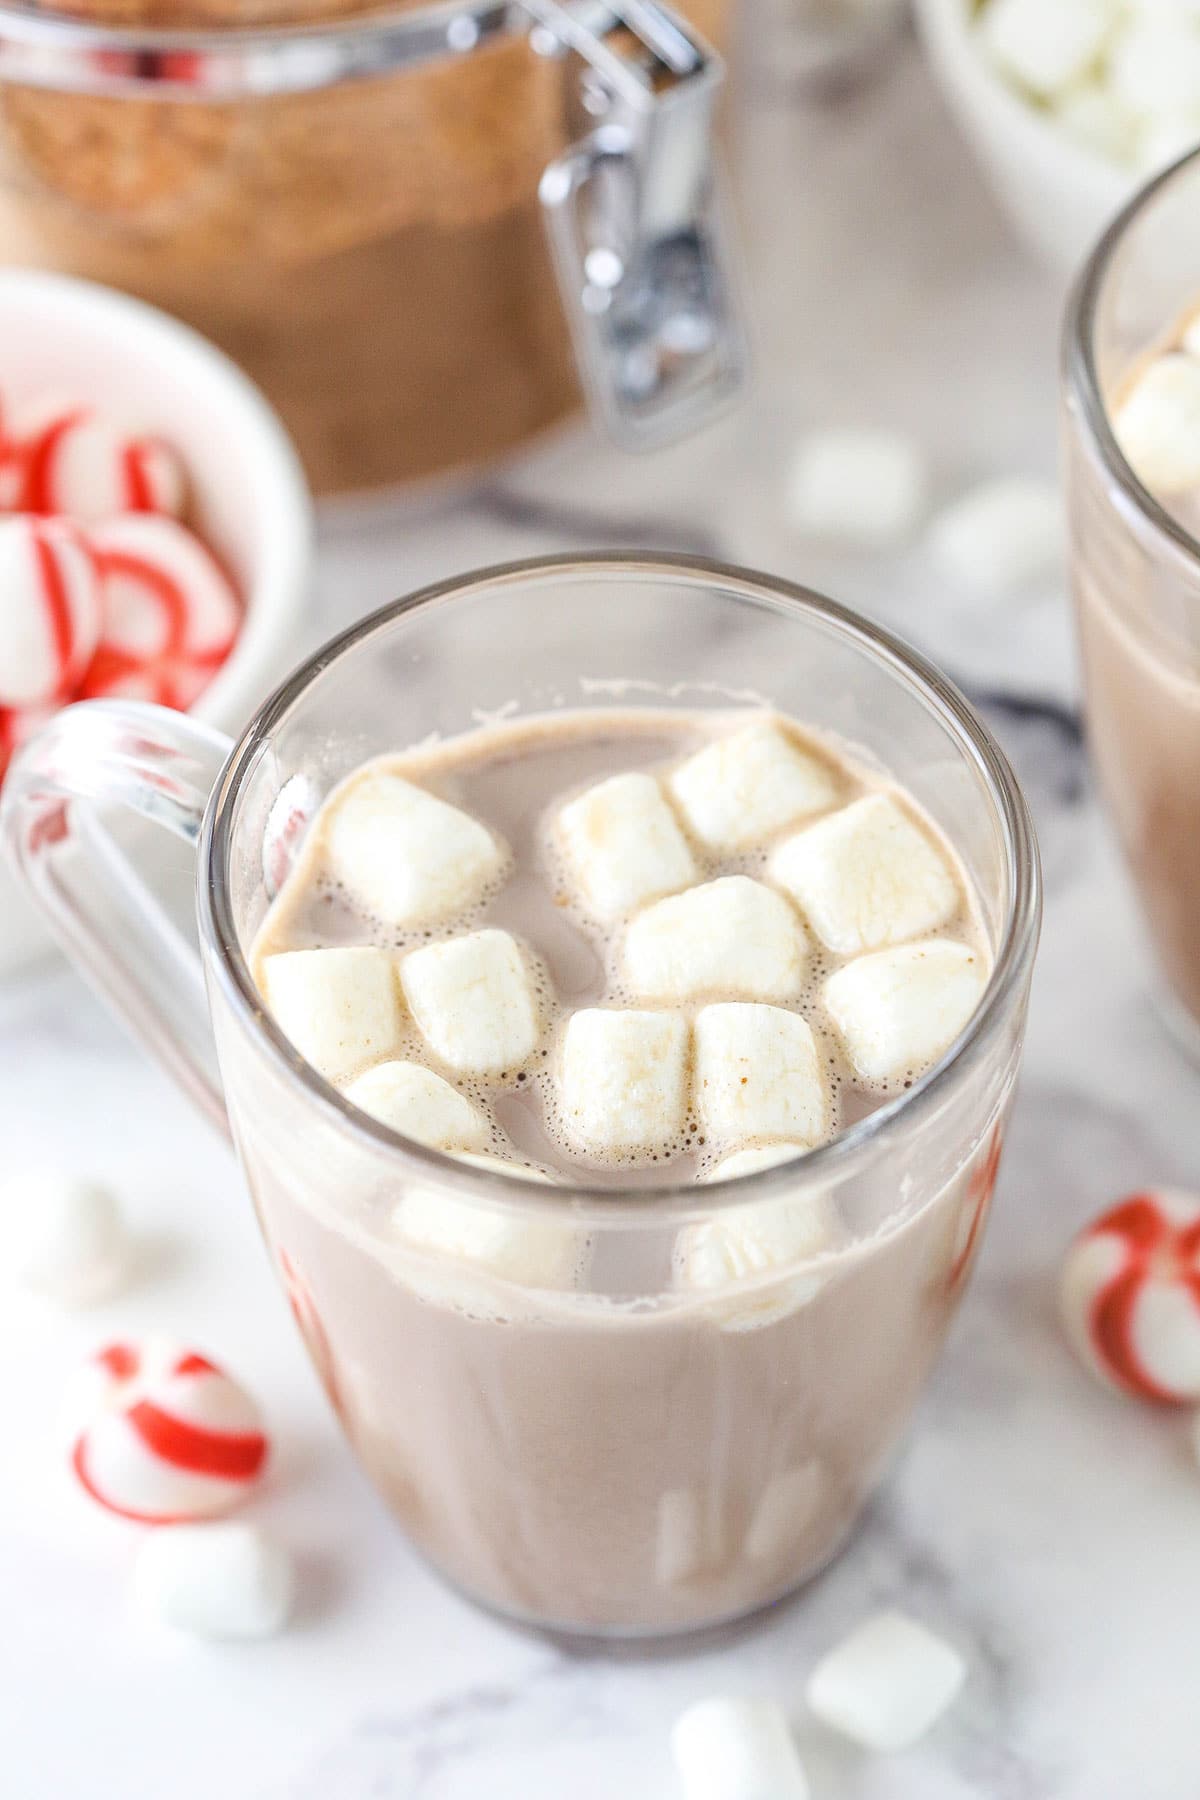 A serving of hot cocoa in a glass mug with melting mini marshmallows on top